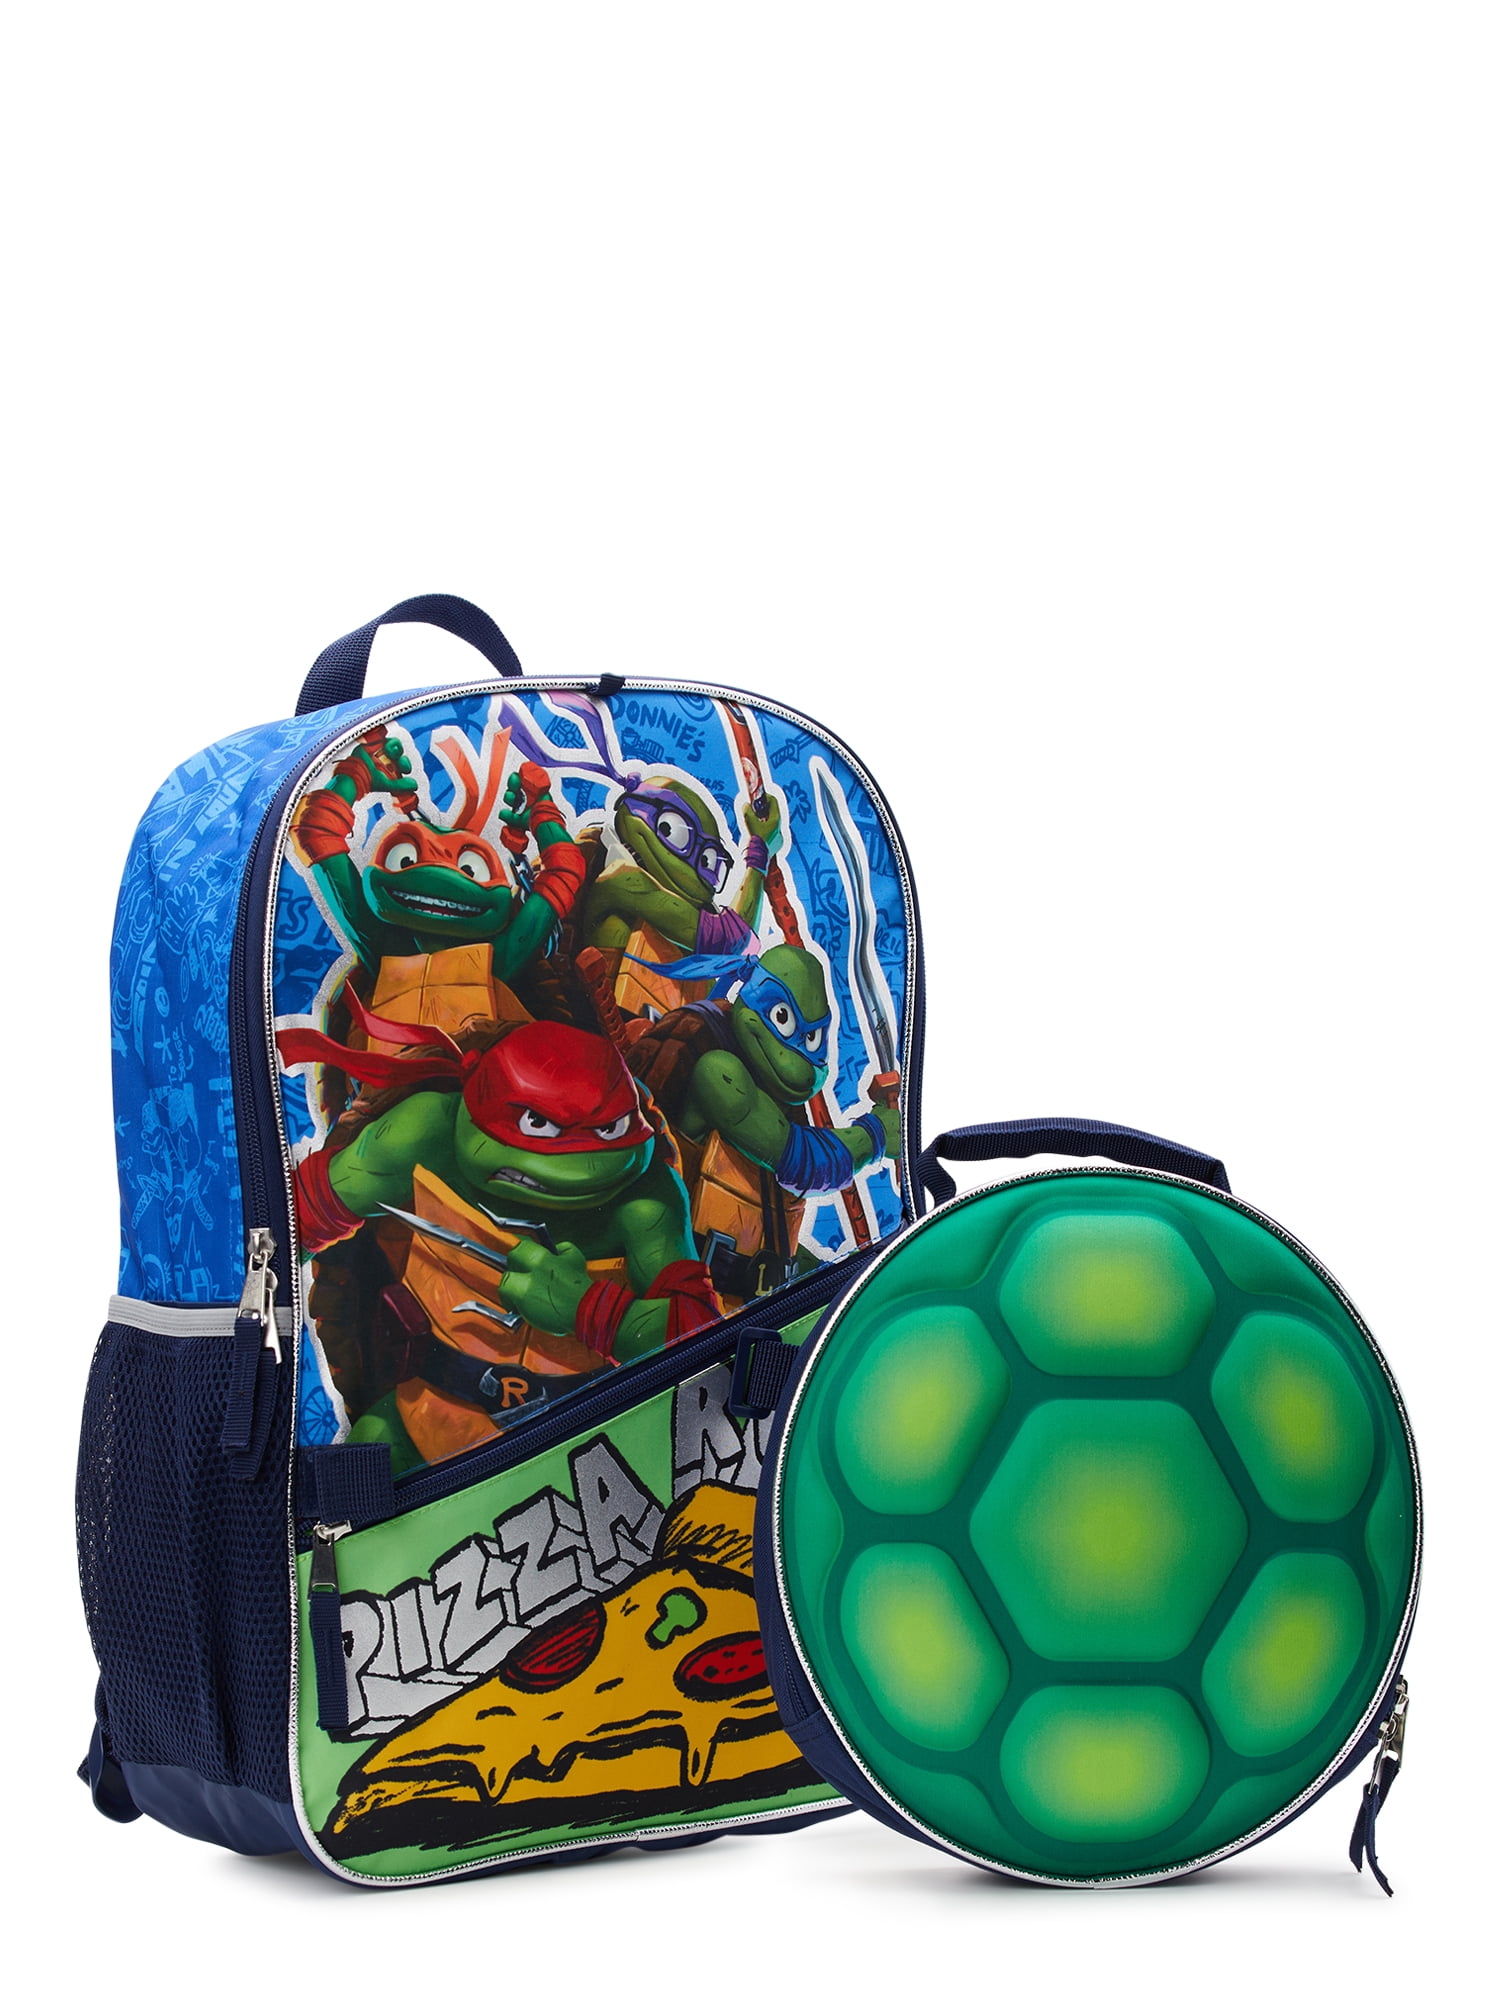 Personalized Ninja Backpack for Back to School 